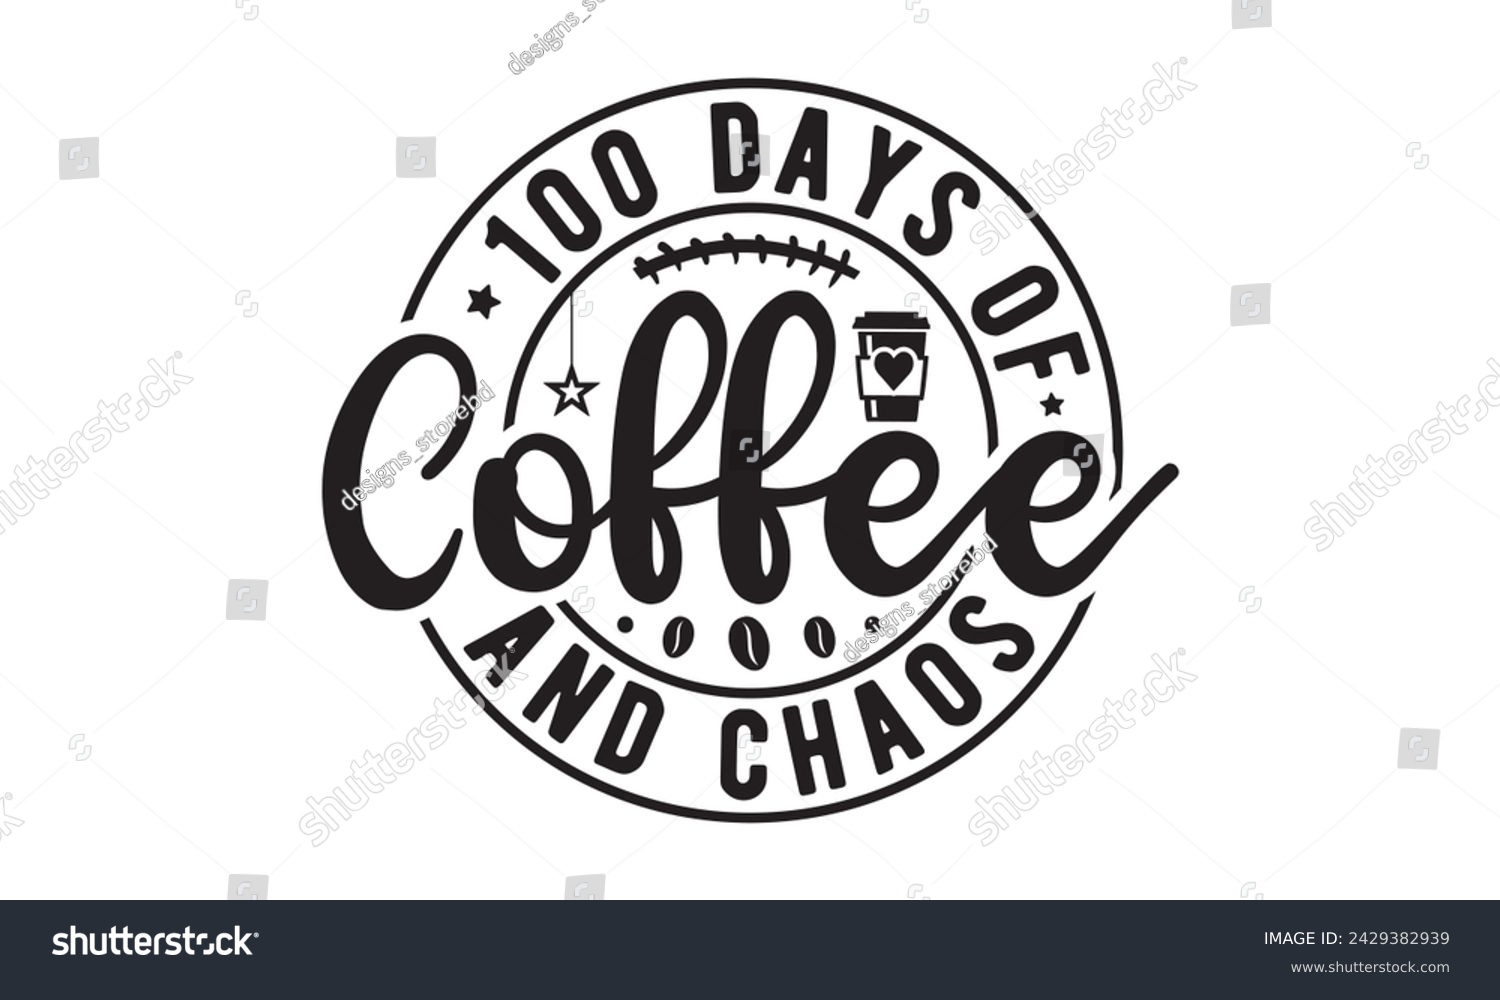 SVG of 100 days of coffee and chaos,100 Days of school svg,Teacher svg,t-shirt design,Retro 100 Days svg,funny 100 Days Of School svg,Printable Vector Illustration,Cut Files Cricut,Silhouette,png,Laser cut svg